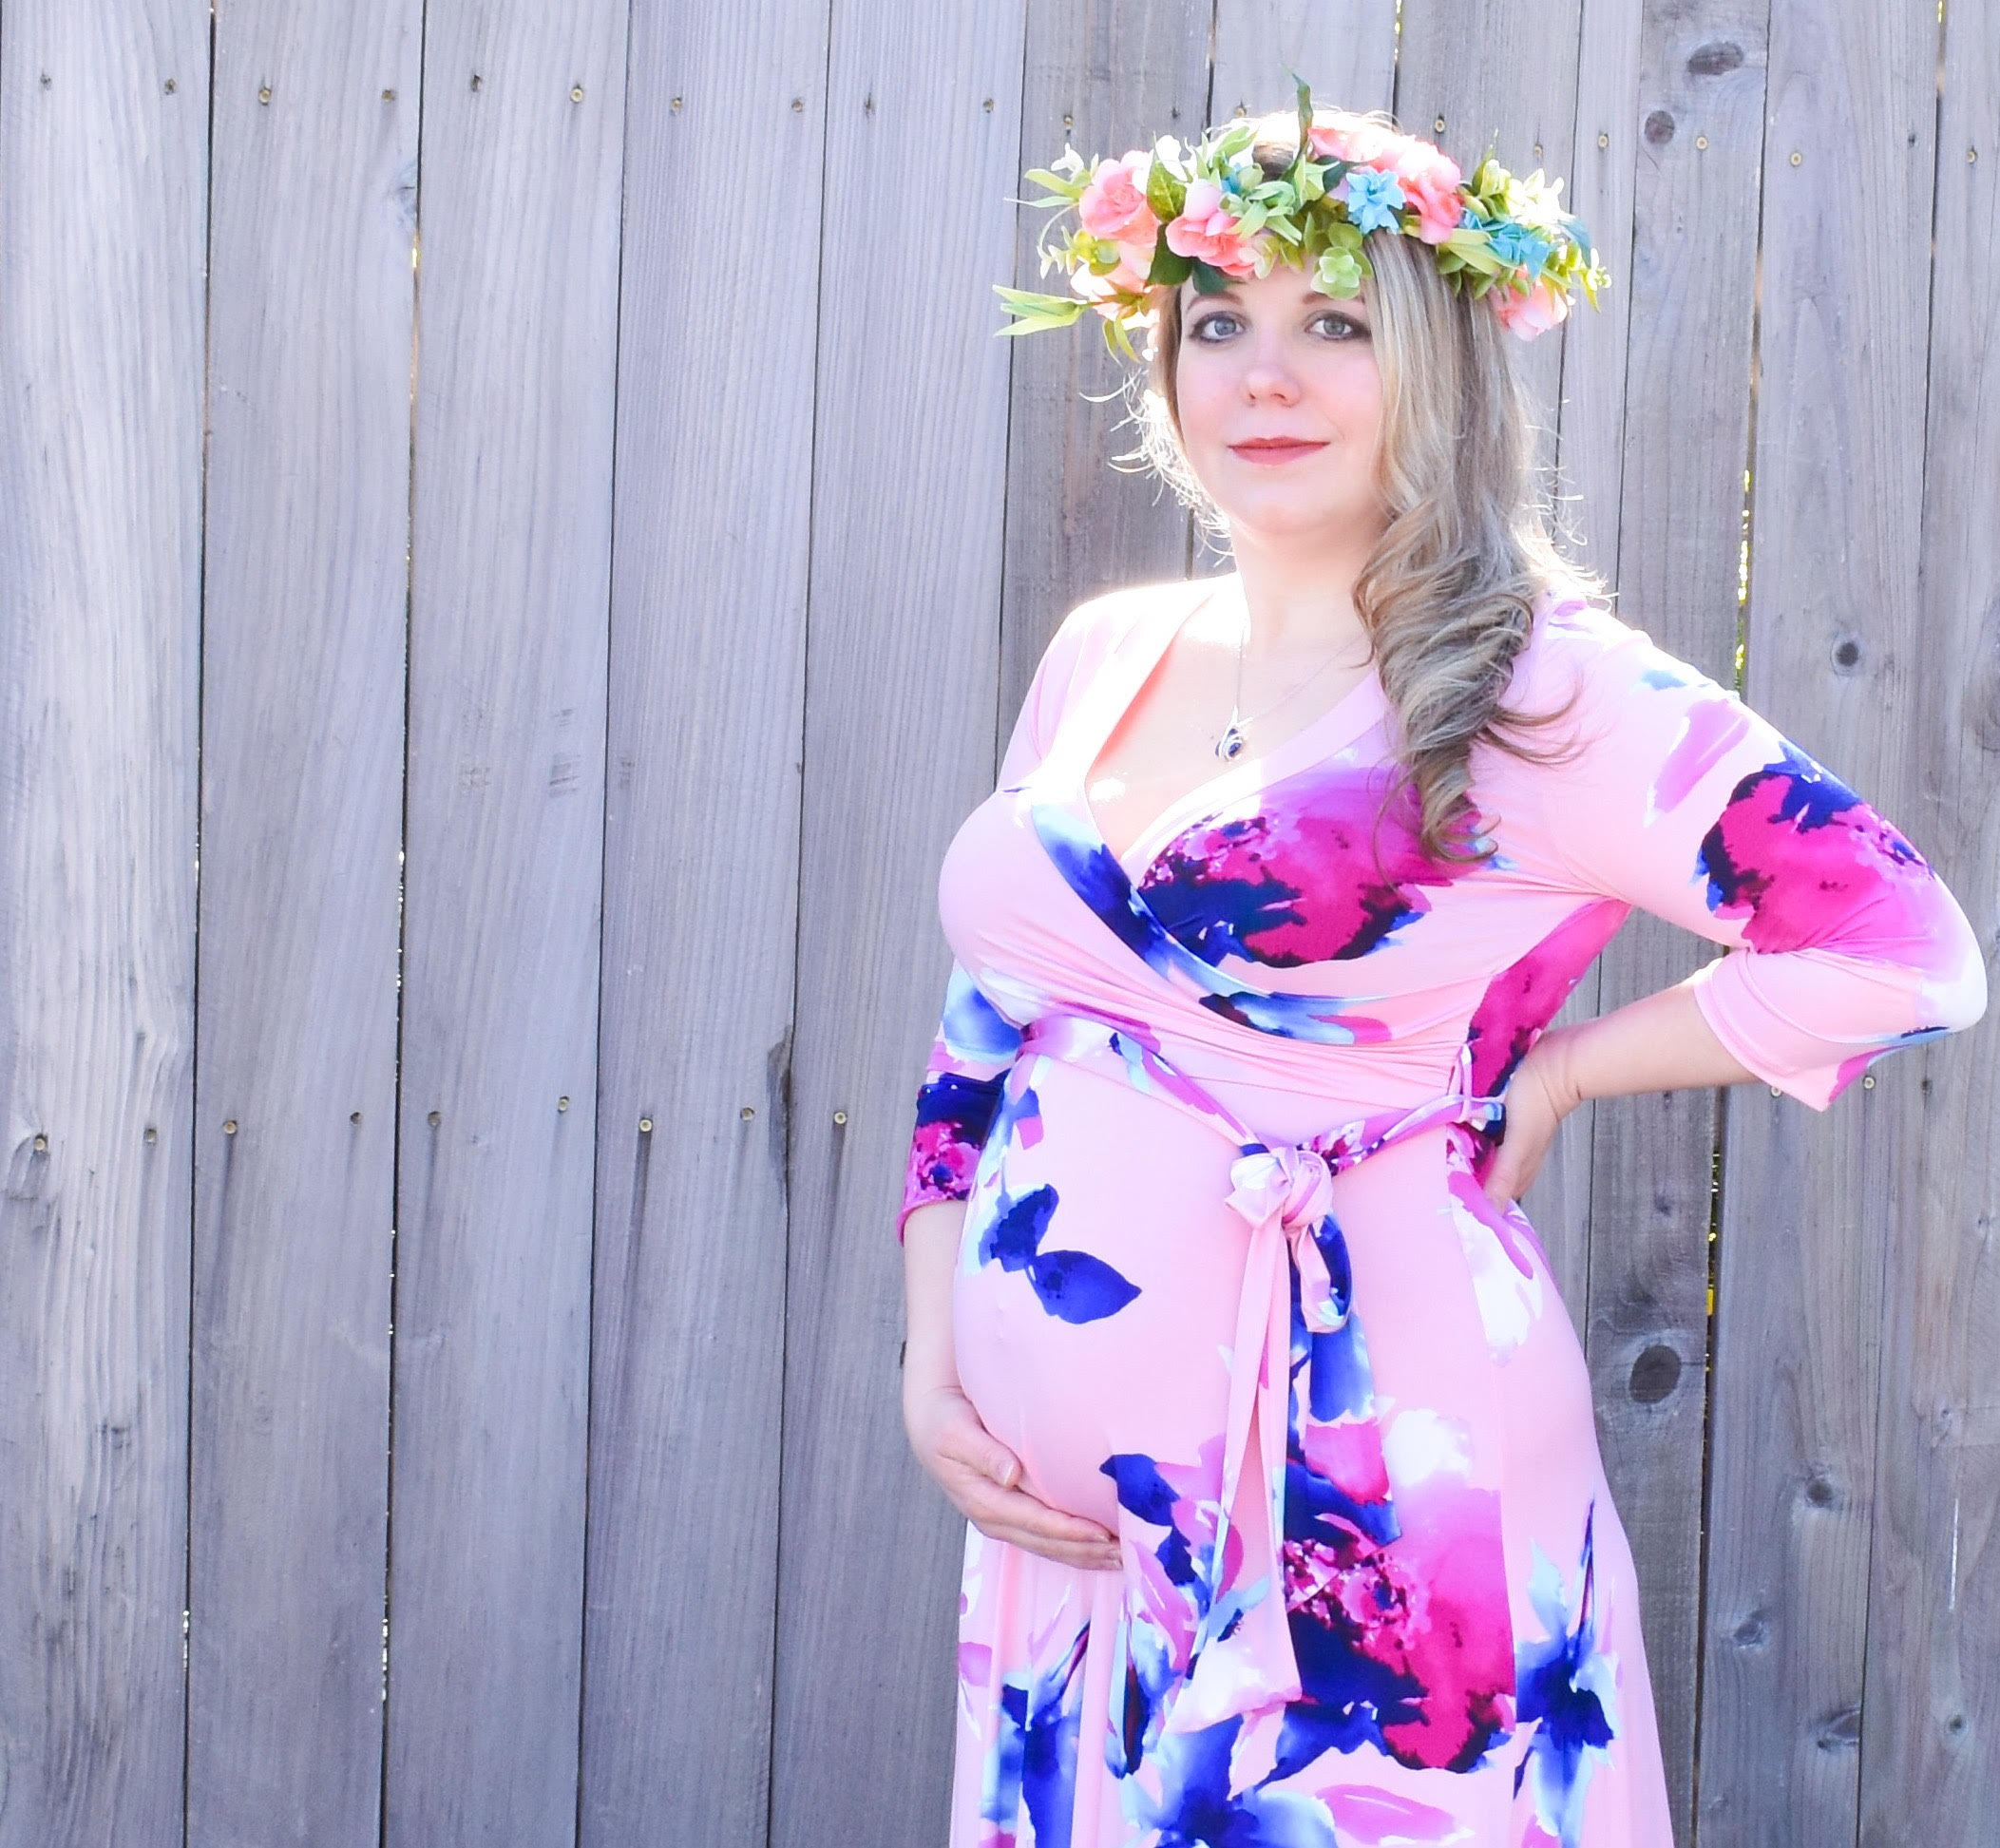 Third Trimester Style with Pink Blush Maternity (+ Giveaway